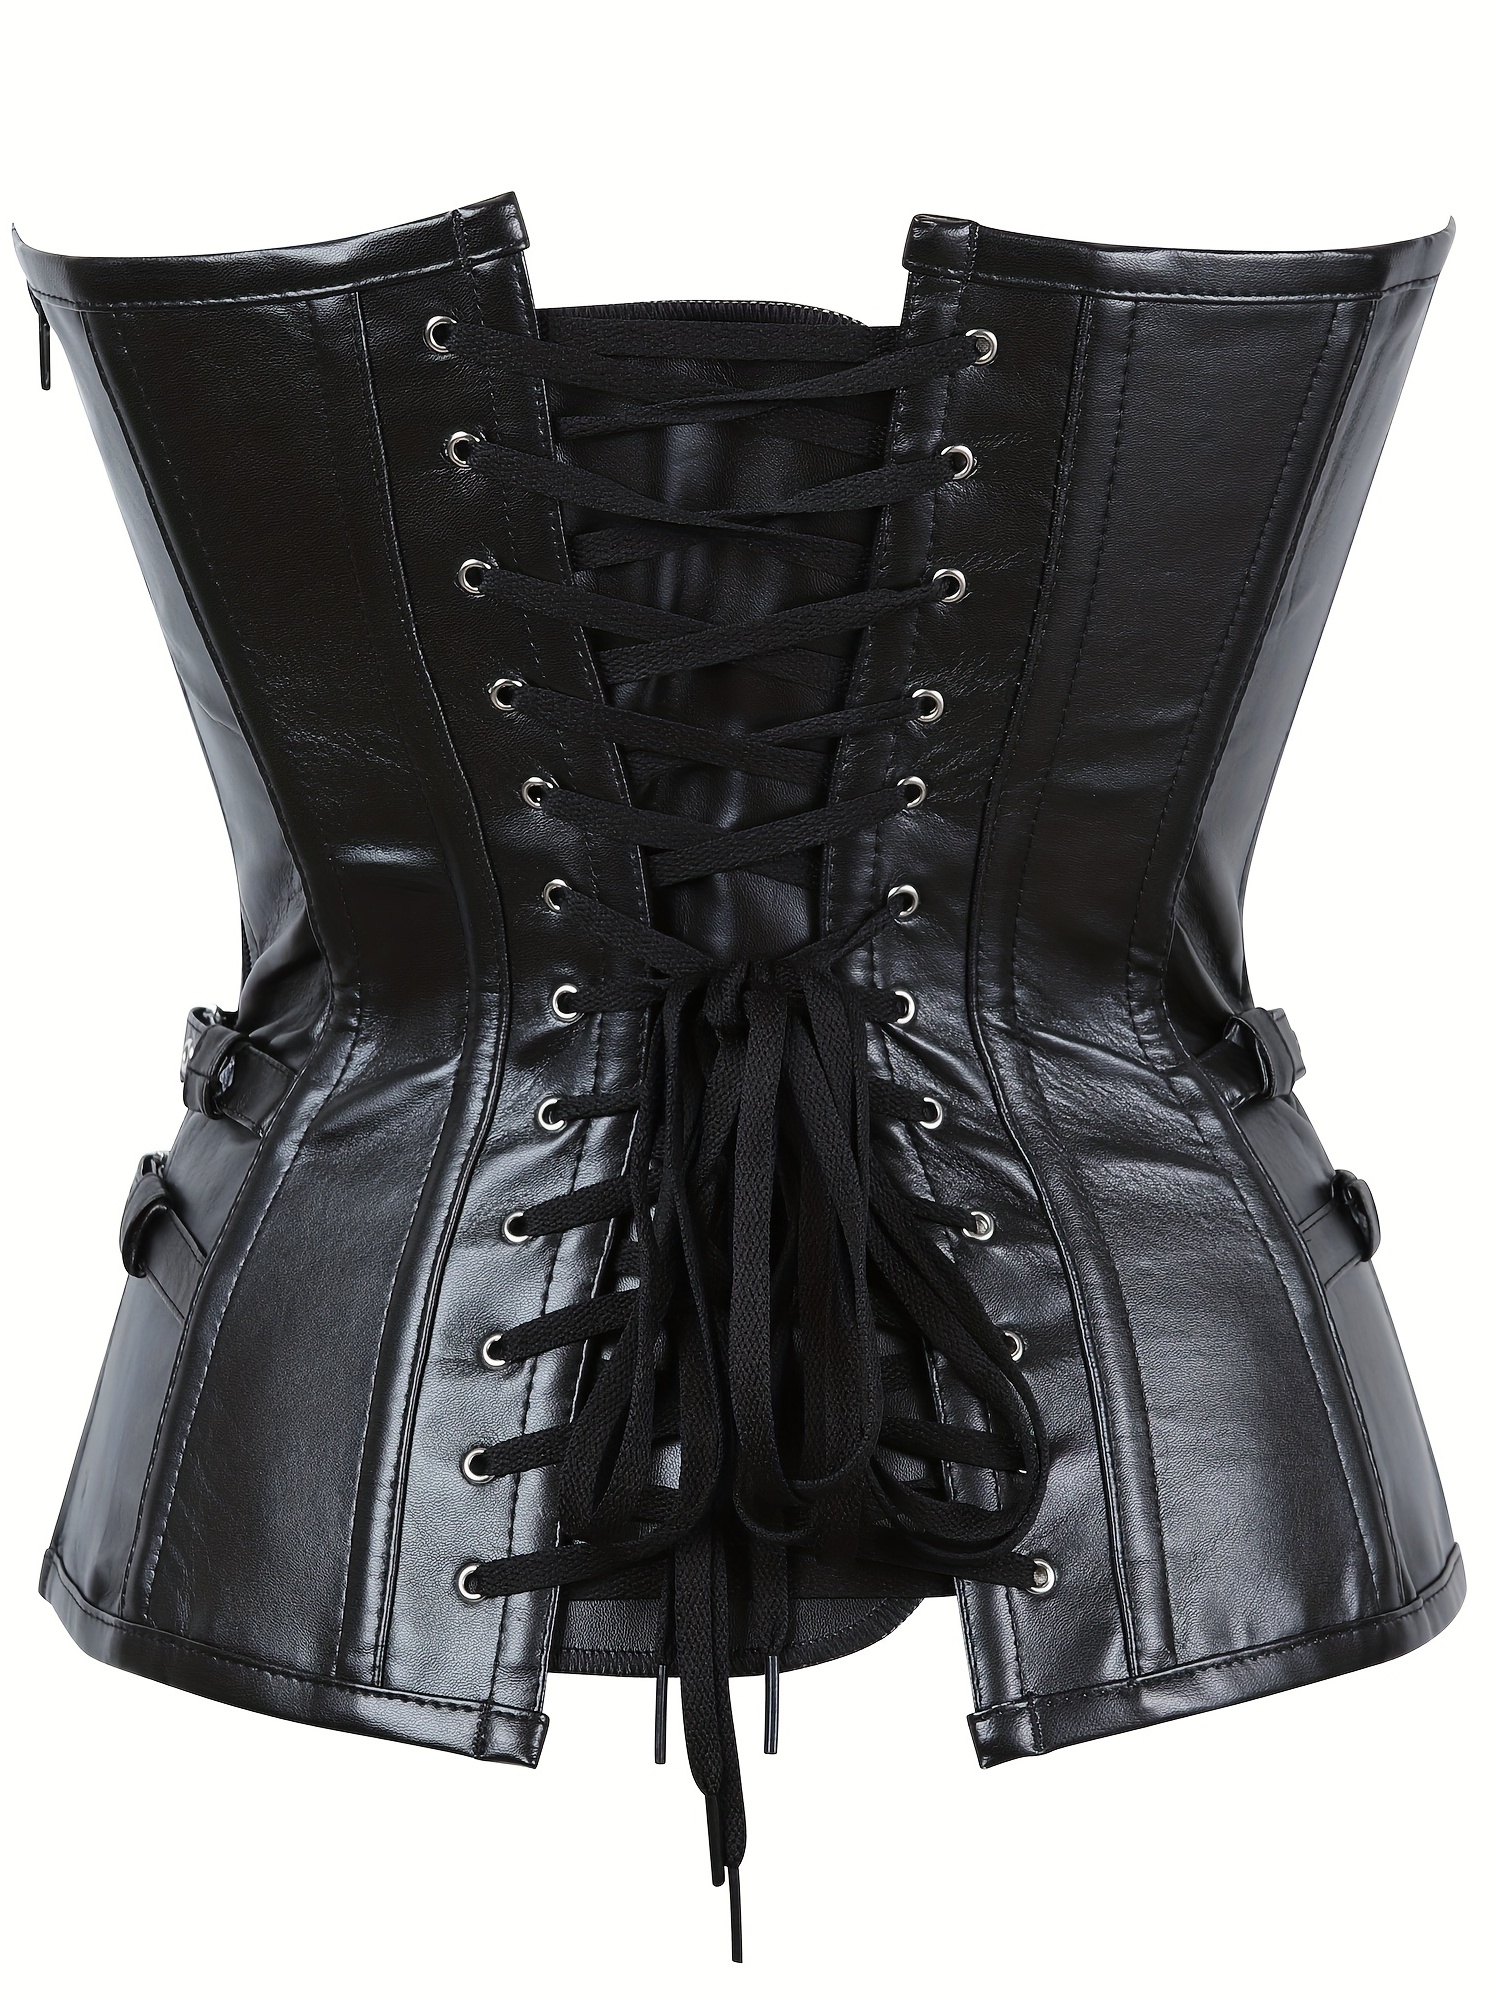 Hot Faux Leather Corset Dress Black Strapless Lace Up Body Shaper Outfit  Sexy Overbust Corset+skirt Pu Showgirl Suit Skirt